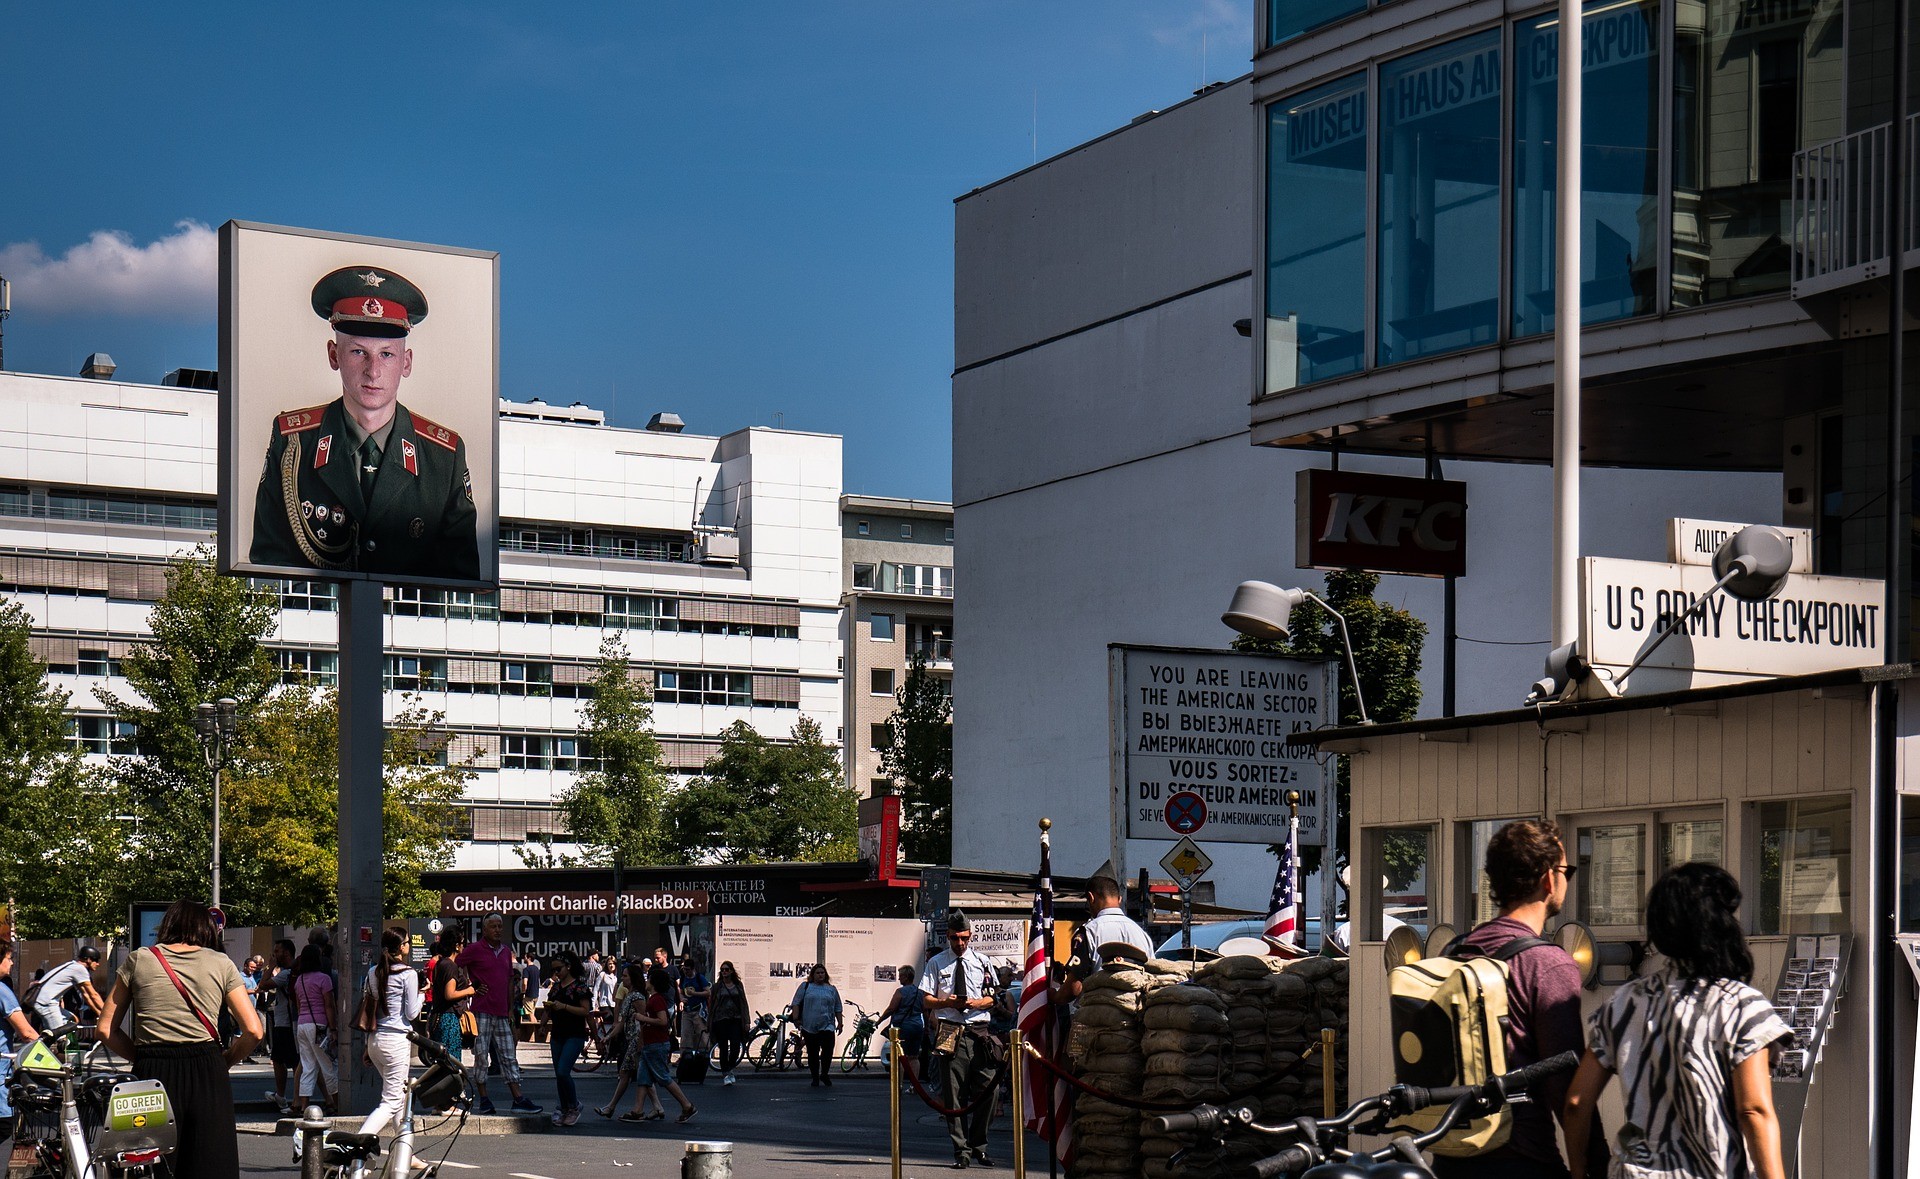 Checkpoint Charlie What to see in Berlin